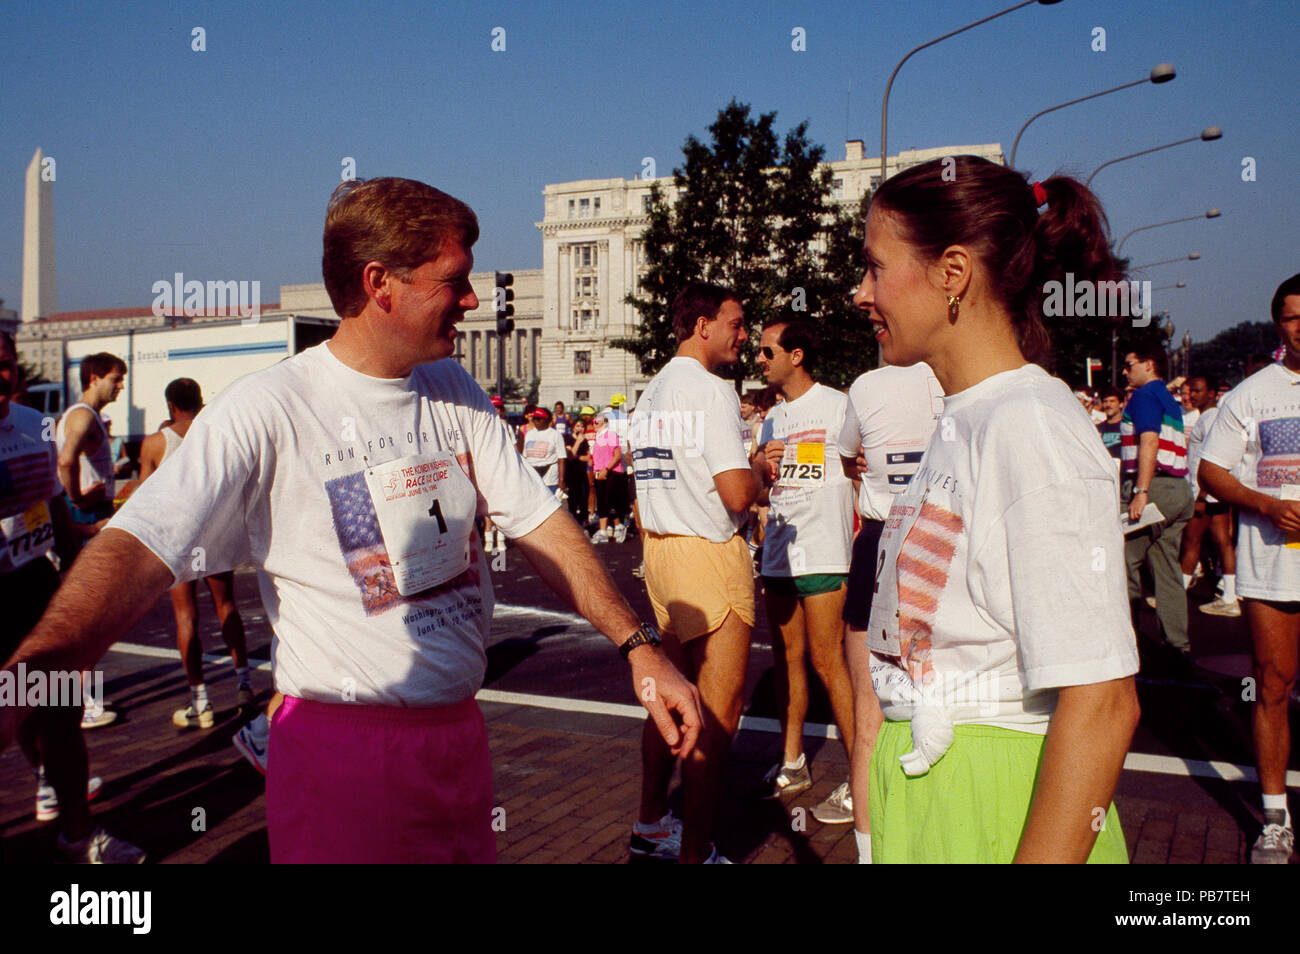 1804 Vice President Dan Quayle and his wife Marilyn at Race for the Cure on Pennsylvania Avenue, Washington, D.C. in 1990 LCCN2011632622 Stock Photo